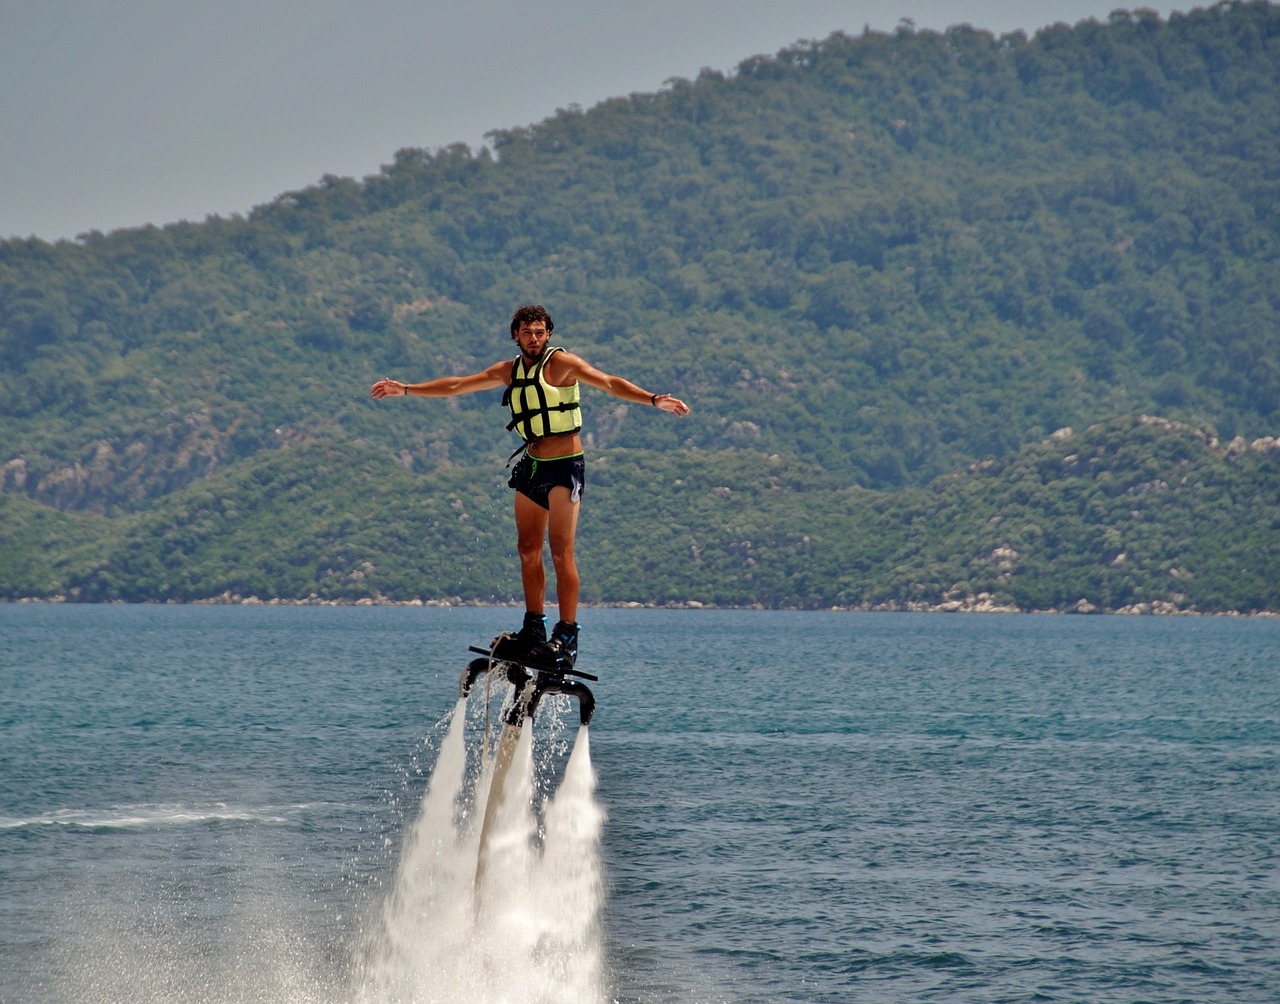 flyboarding water sports extreme free photo